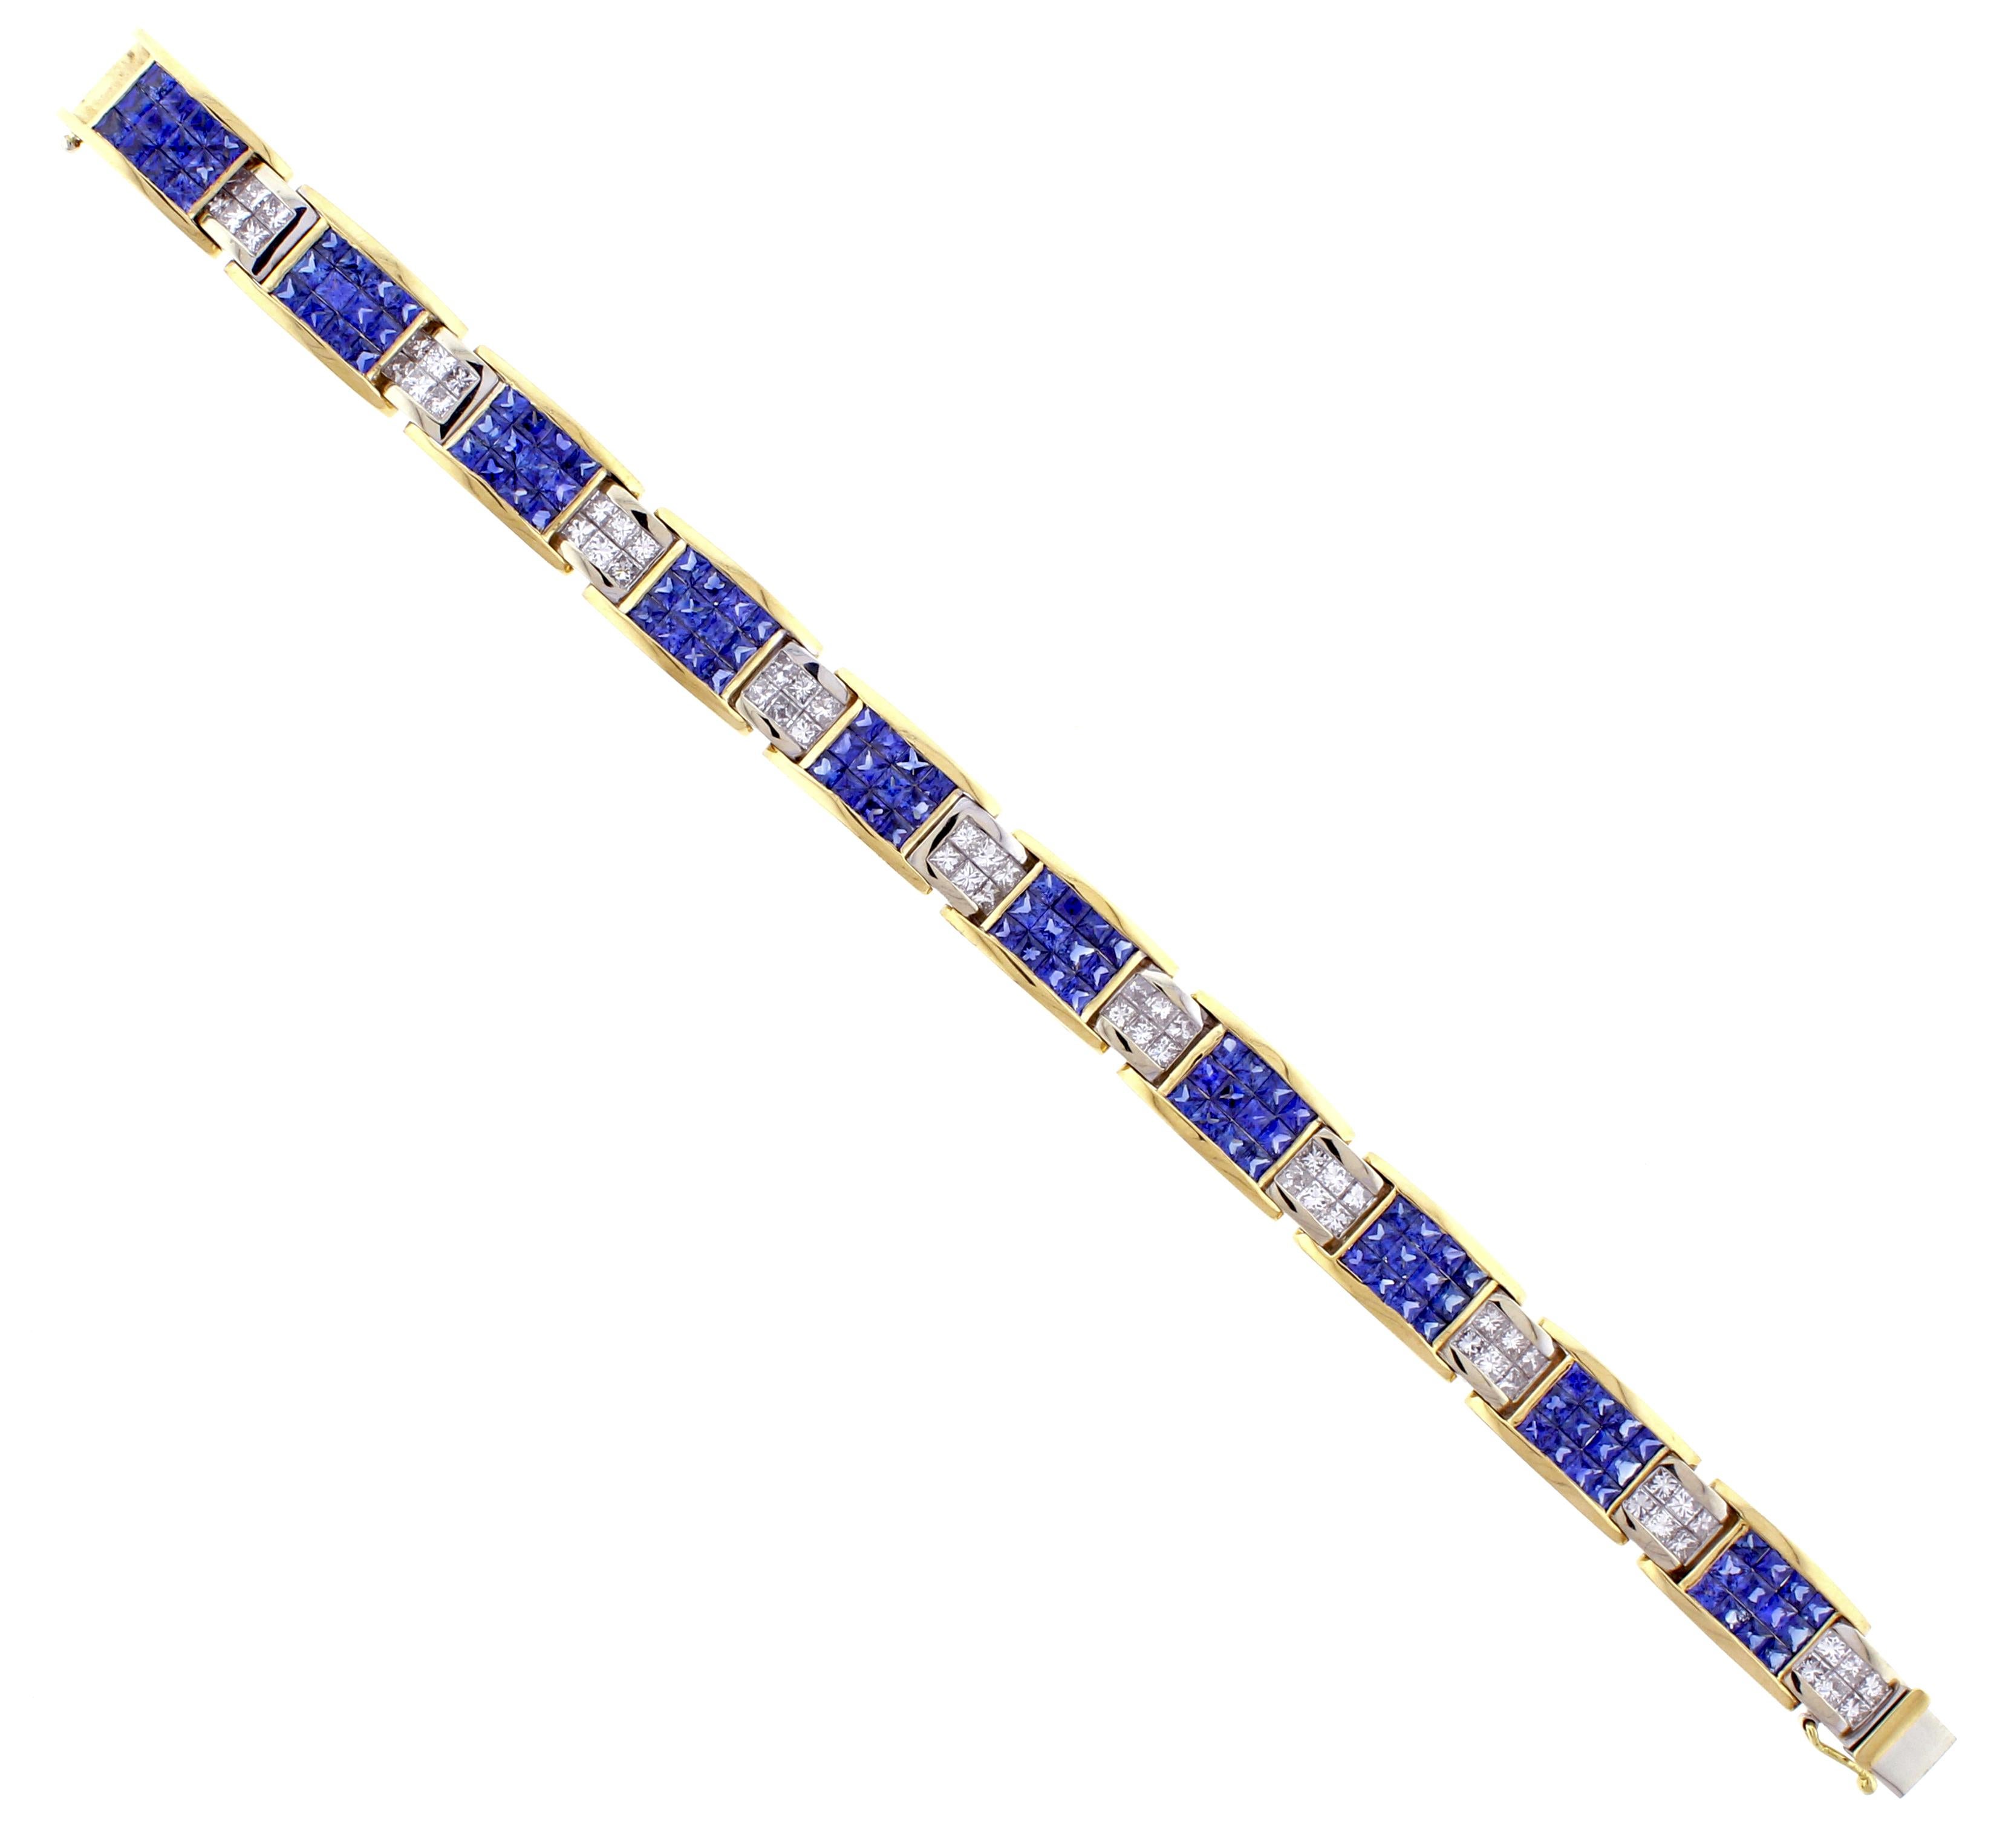 This bold  18 karat  white and yellow gold sapphire and diamond bracelet is comprised of 120 invisible set princess cut sapphires weighing approximately 14.4 carats and 60 invisible set princess cut diamonds weighing approximately  6 carats. The